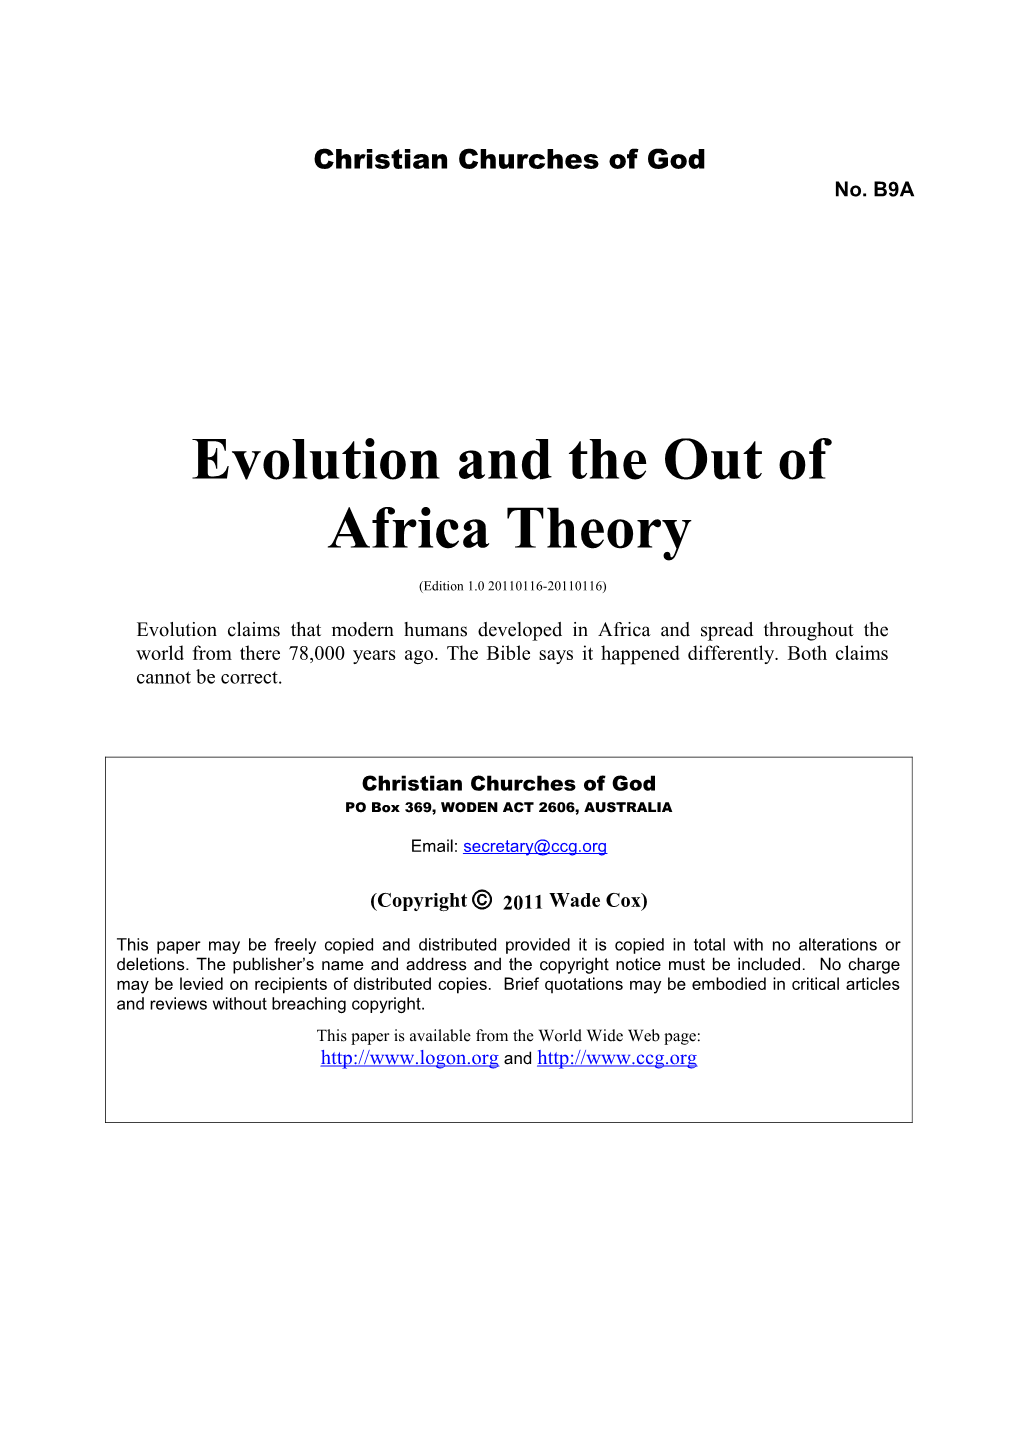 Evolution and the out of Africa Theory (No. B9A)